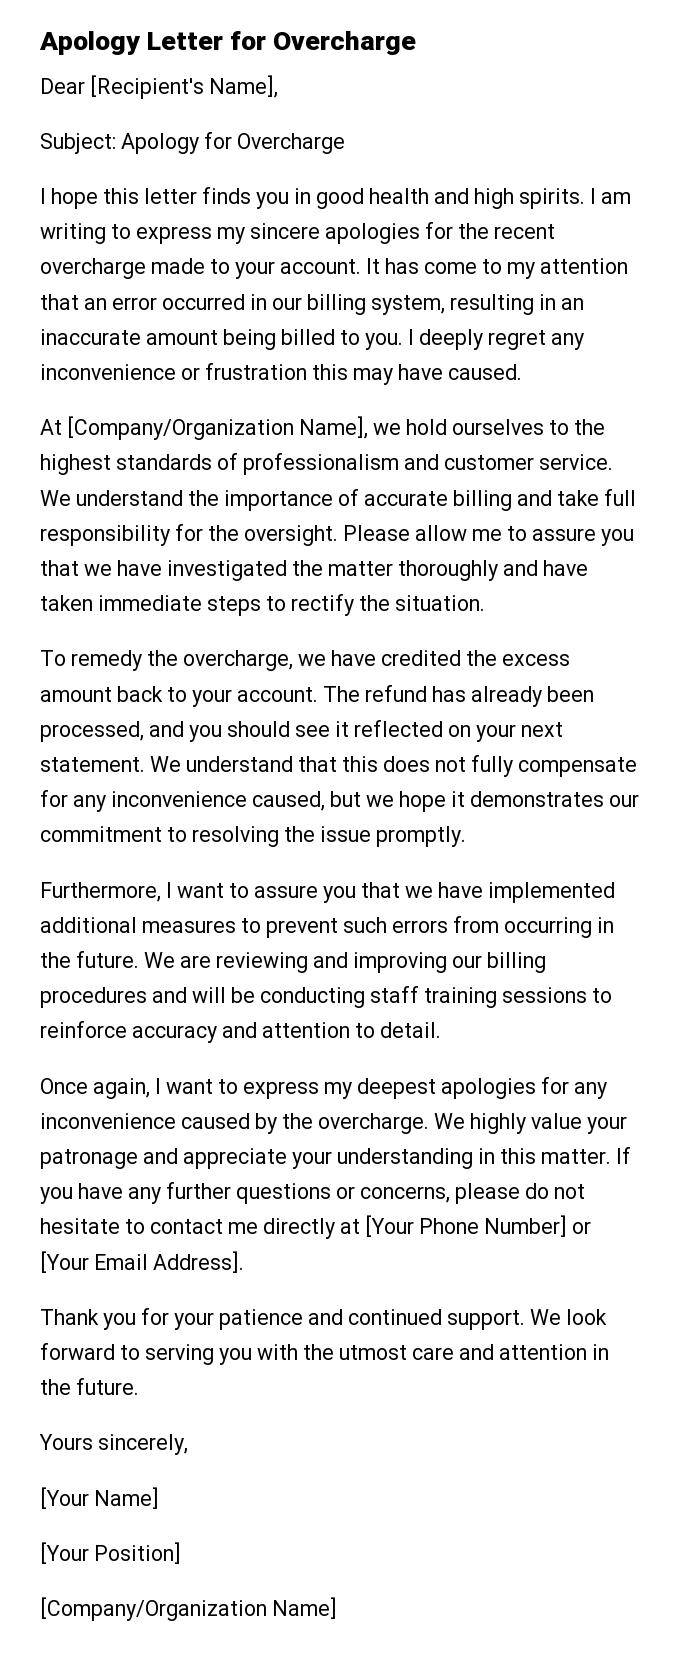 Apology Letter for Overcharge